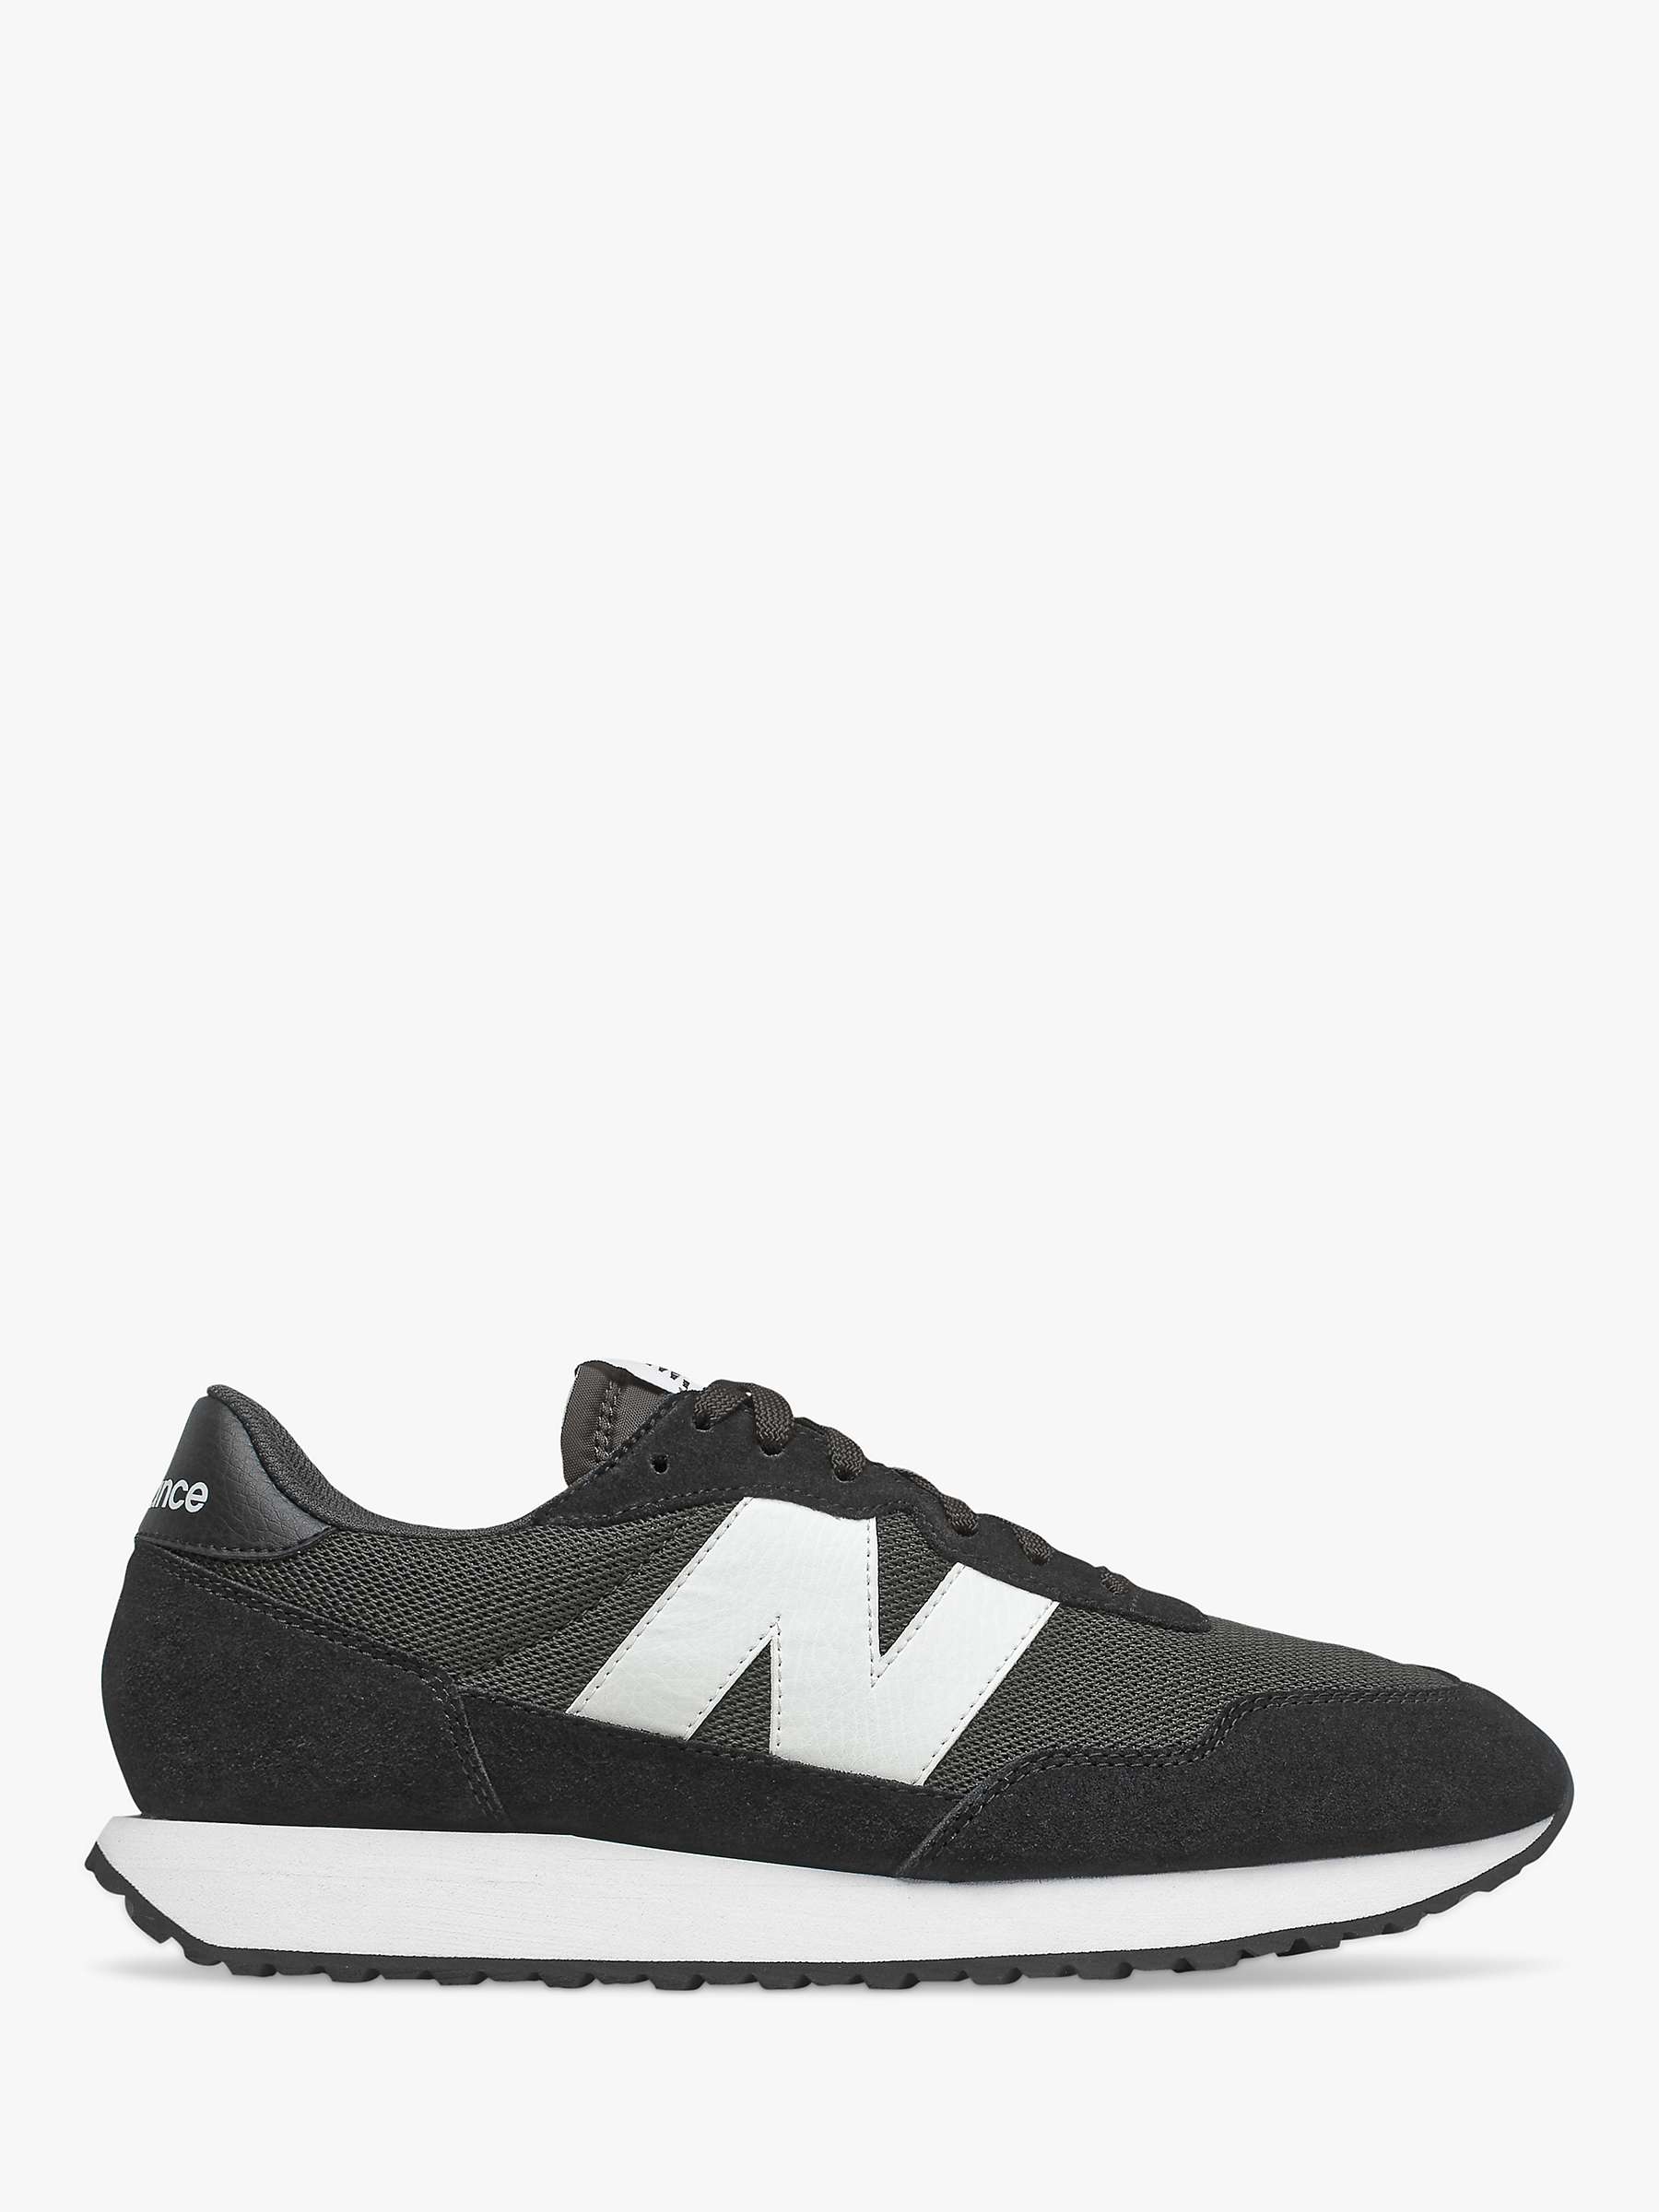 New Balance 237 Men's Suede Lace Up Trainers, Black/Magnet at John ...